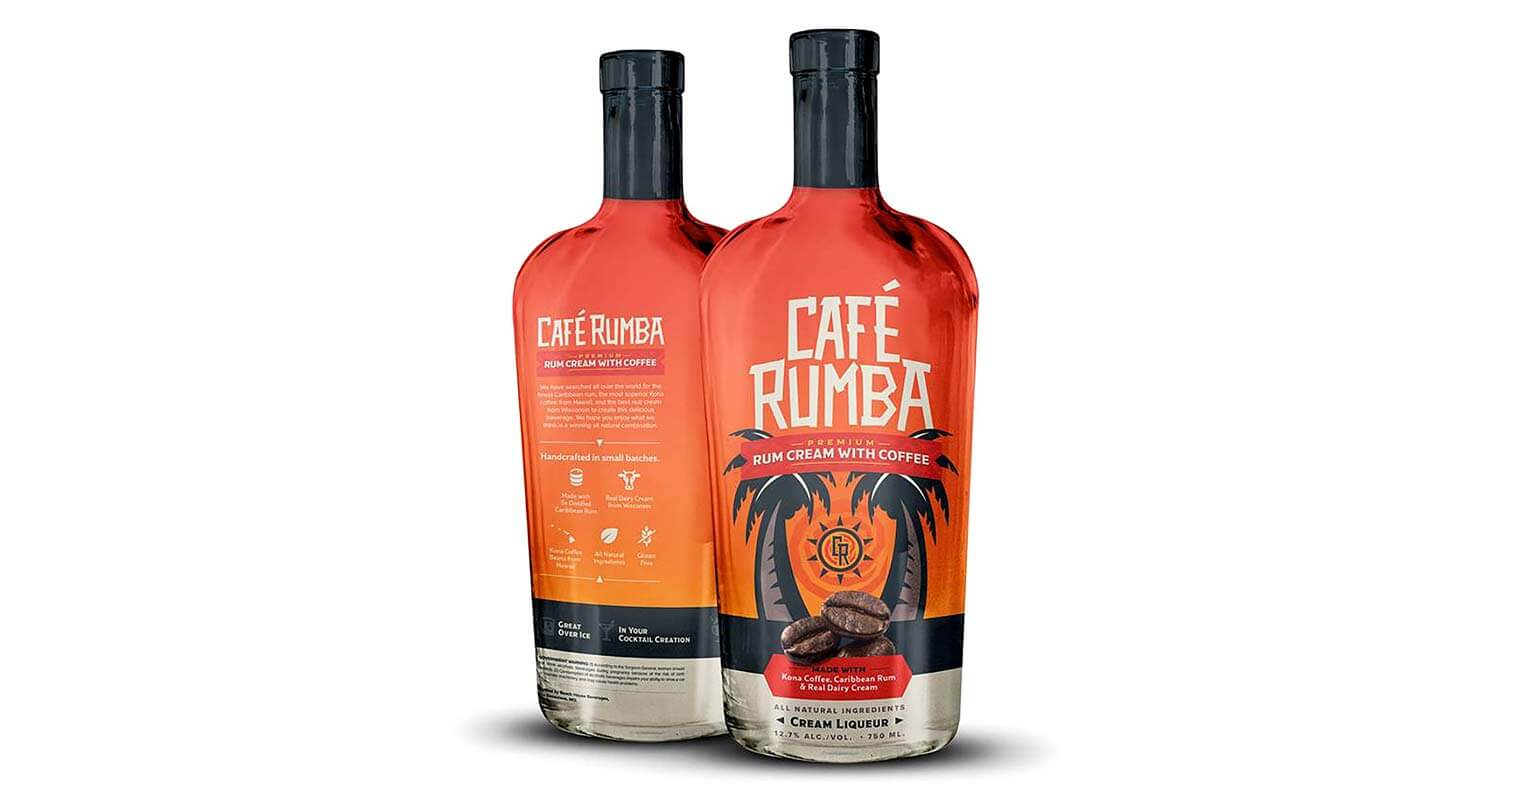 Café Rumba Rum Cream with Coffee, bottles on white, featured image